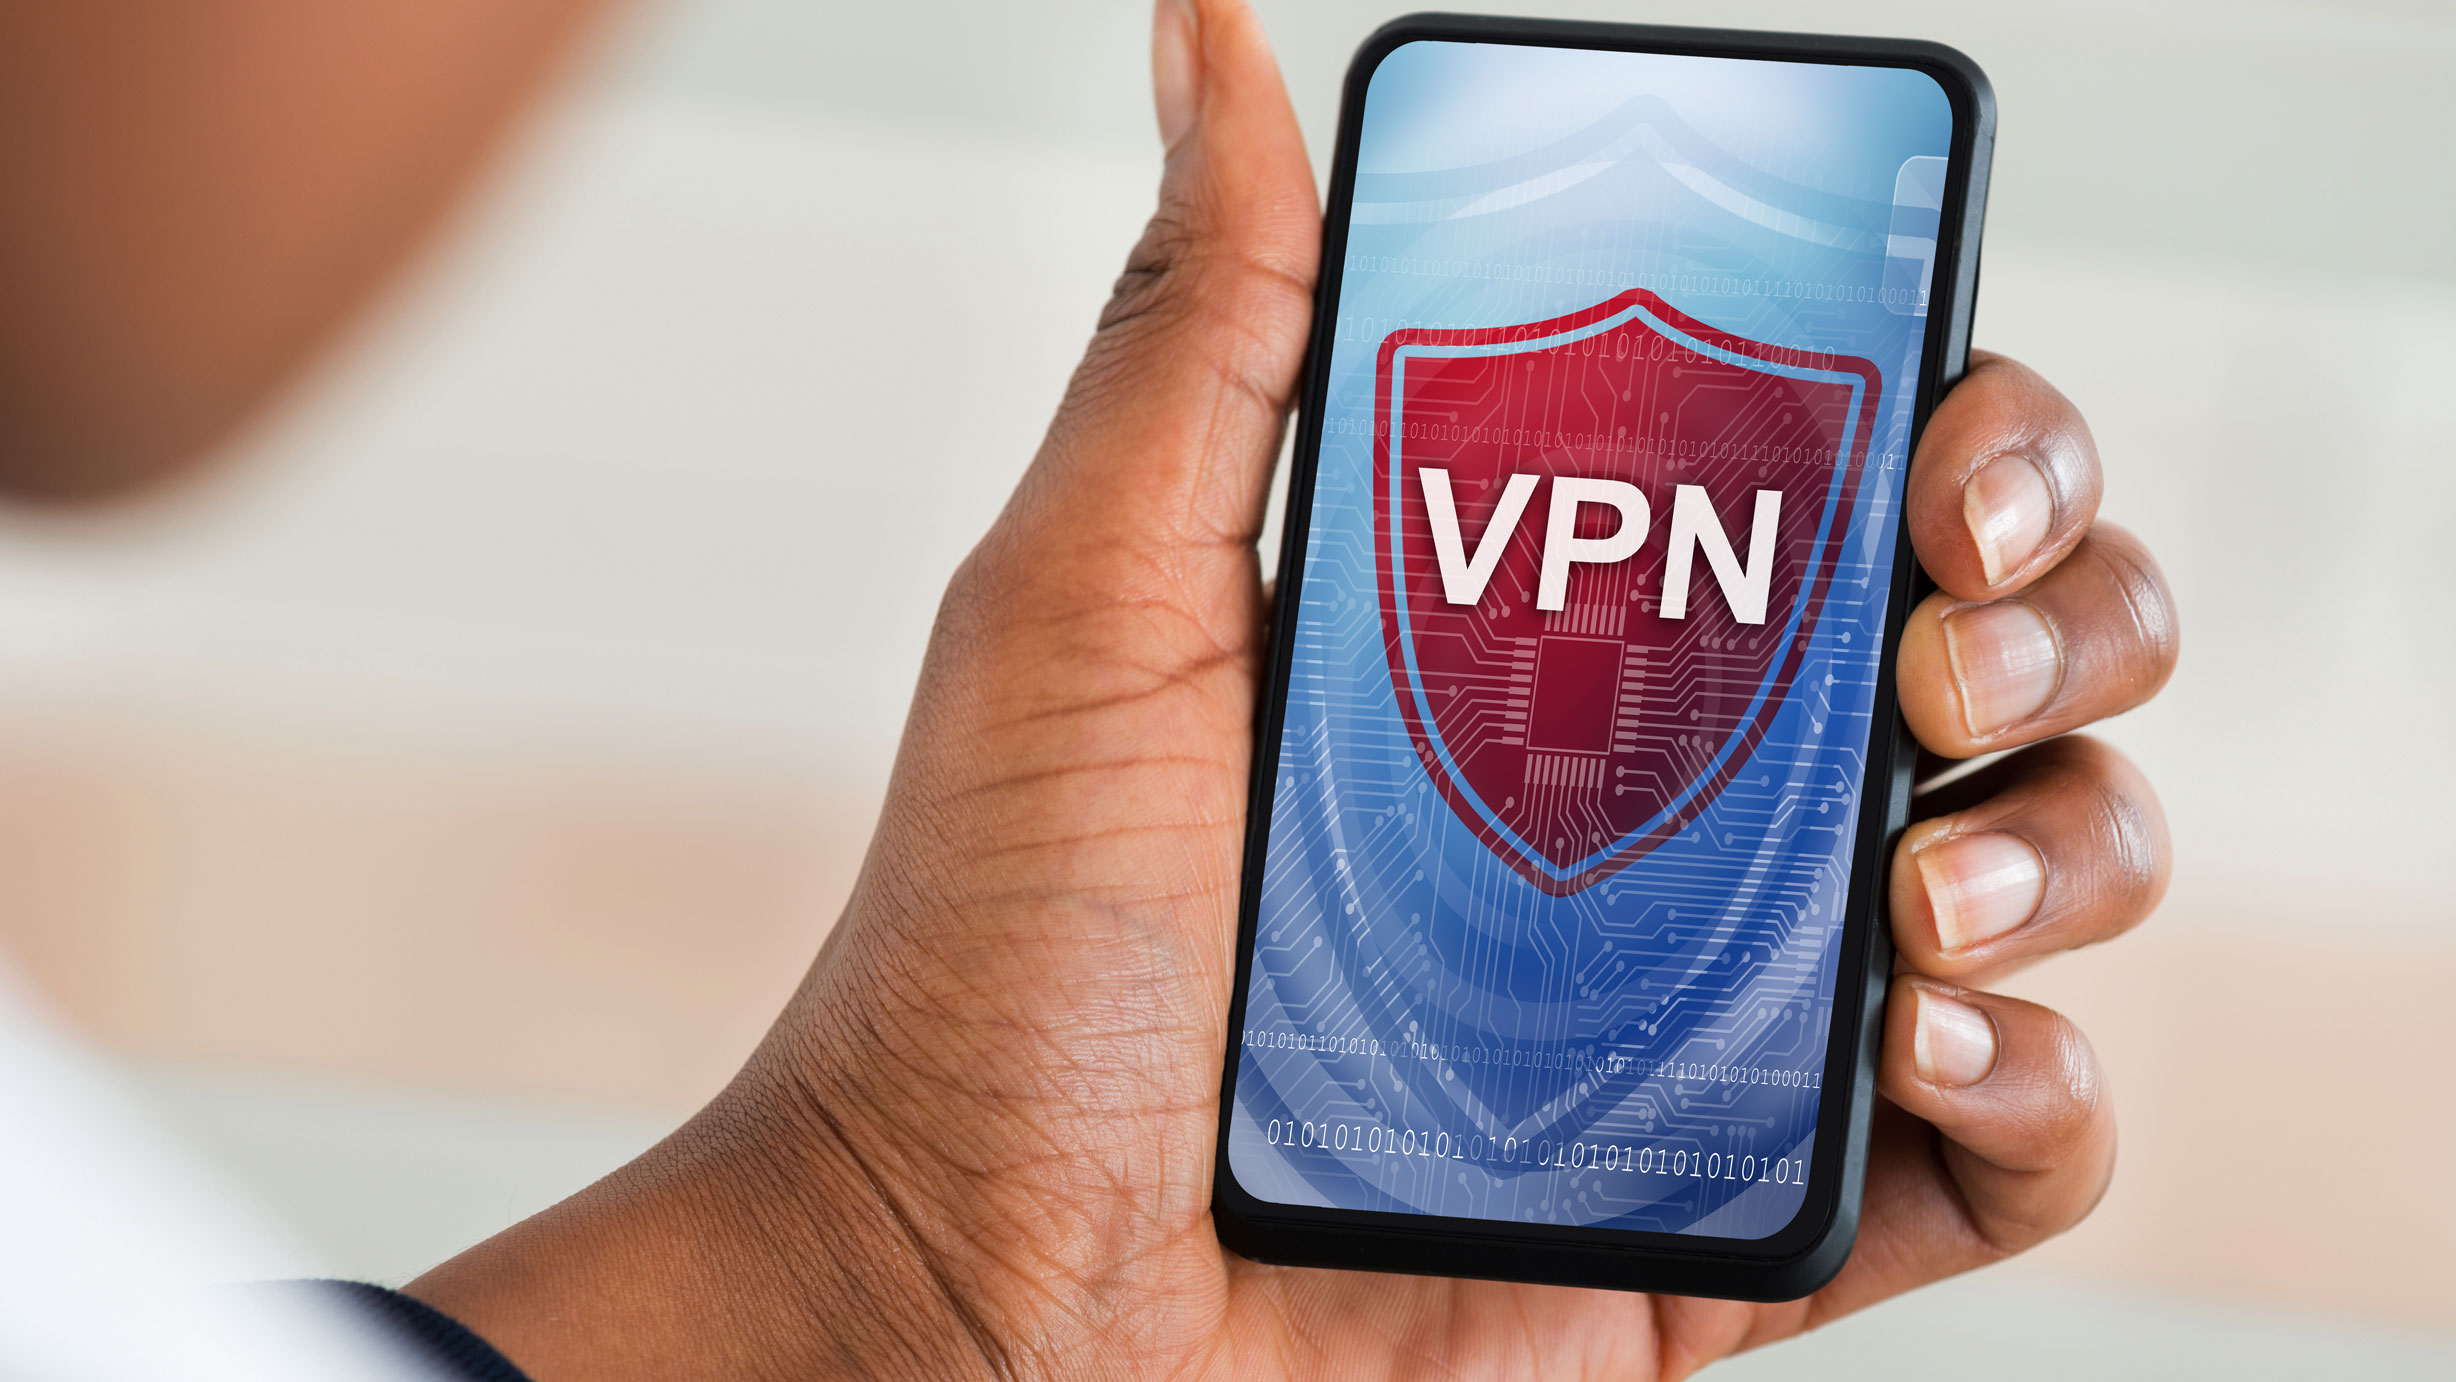 VPN on a phone screen held by a man